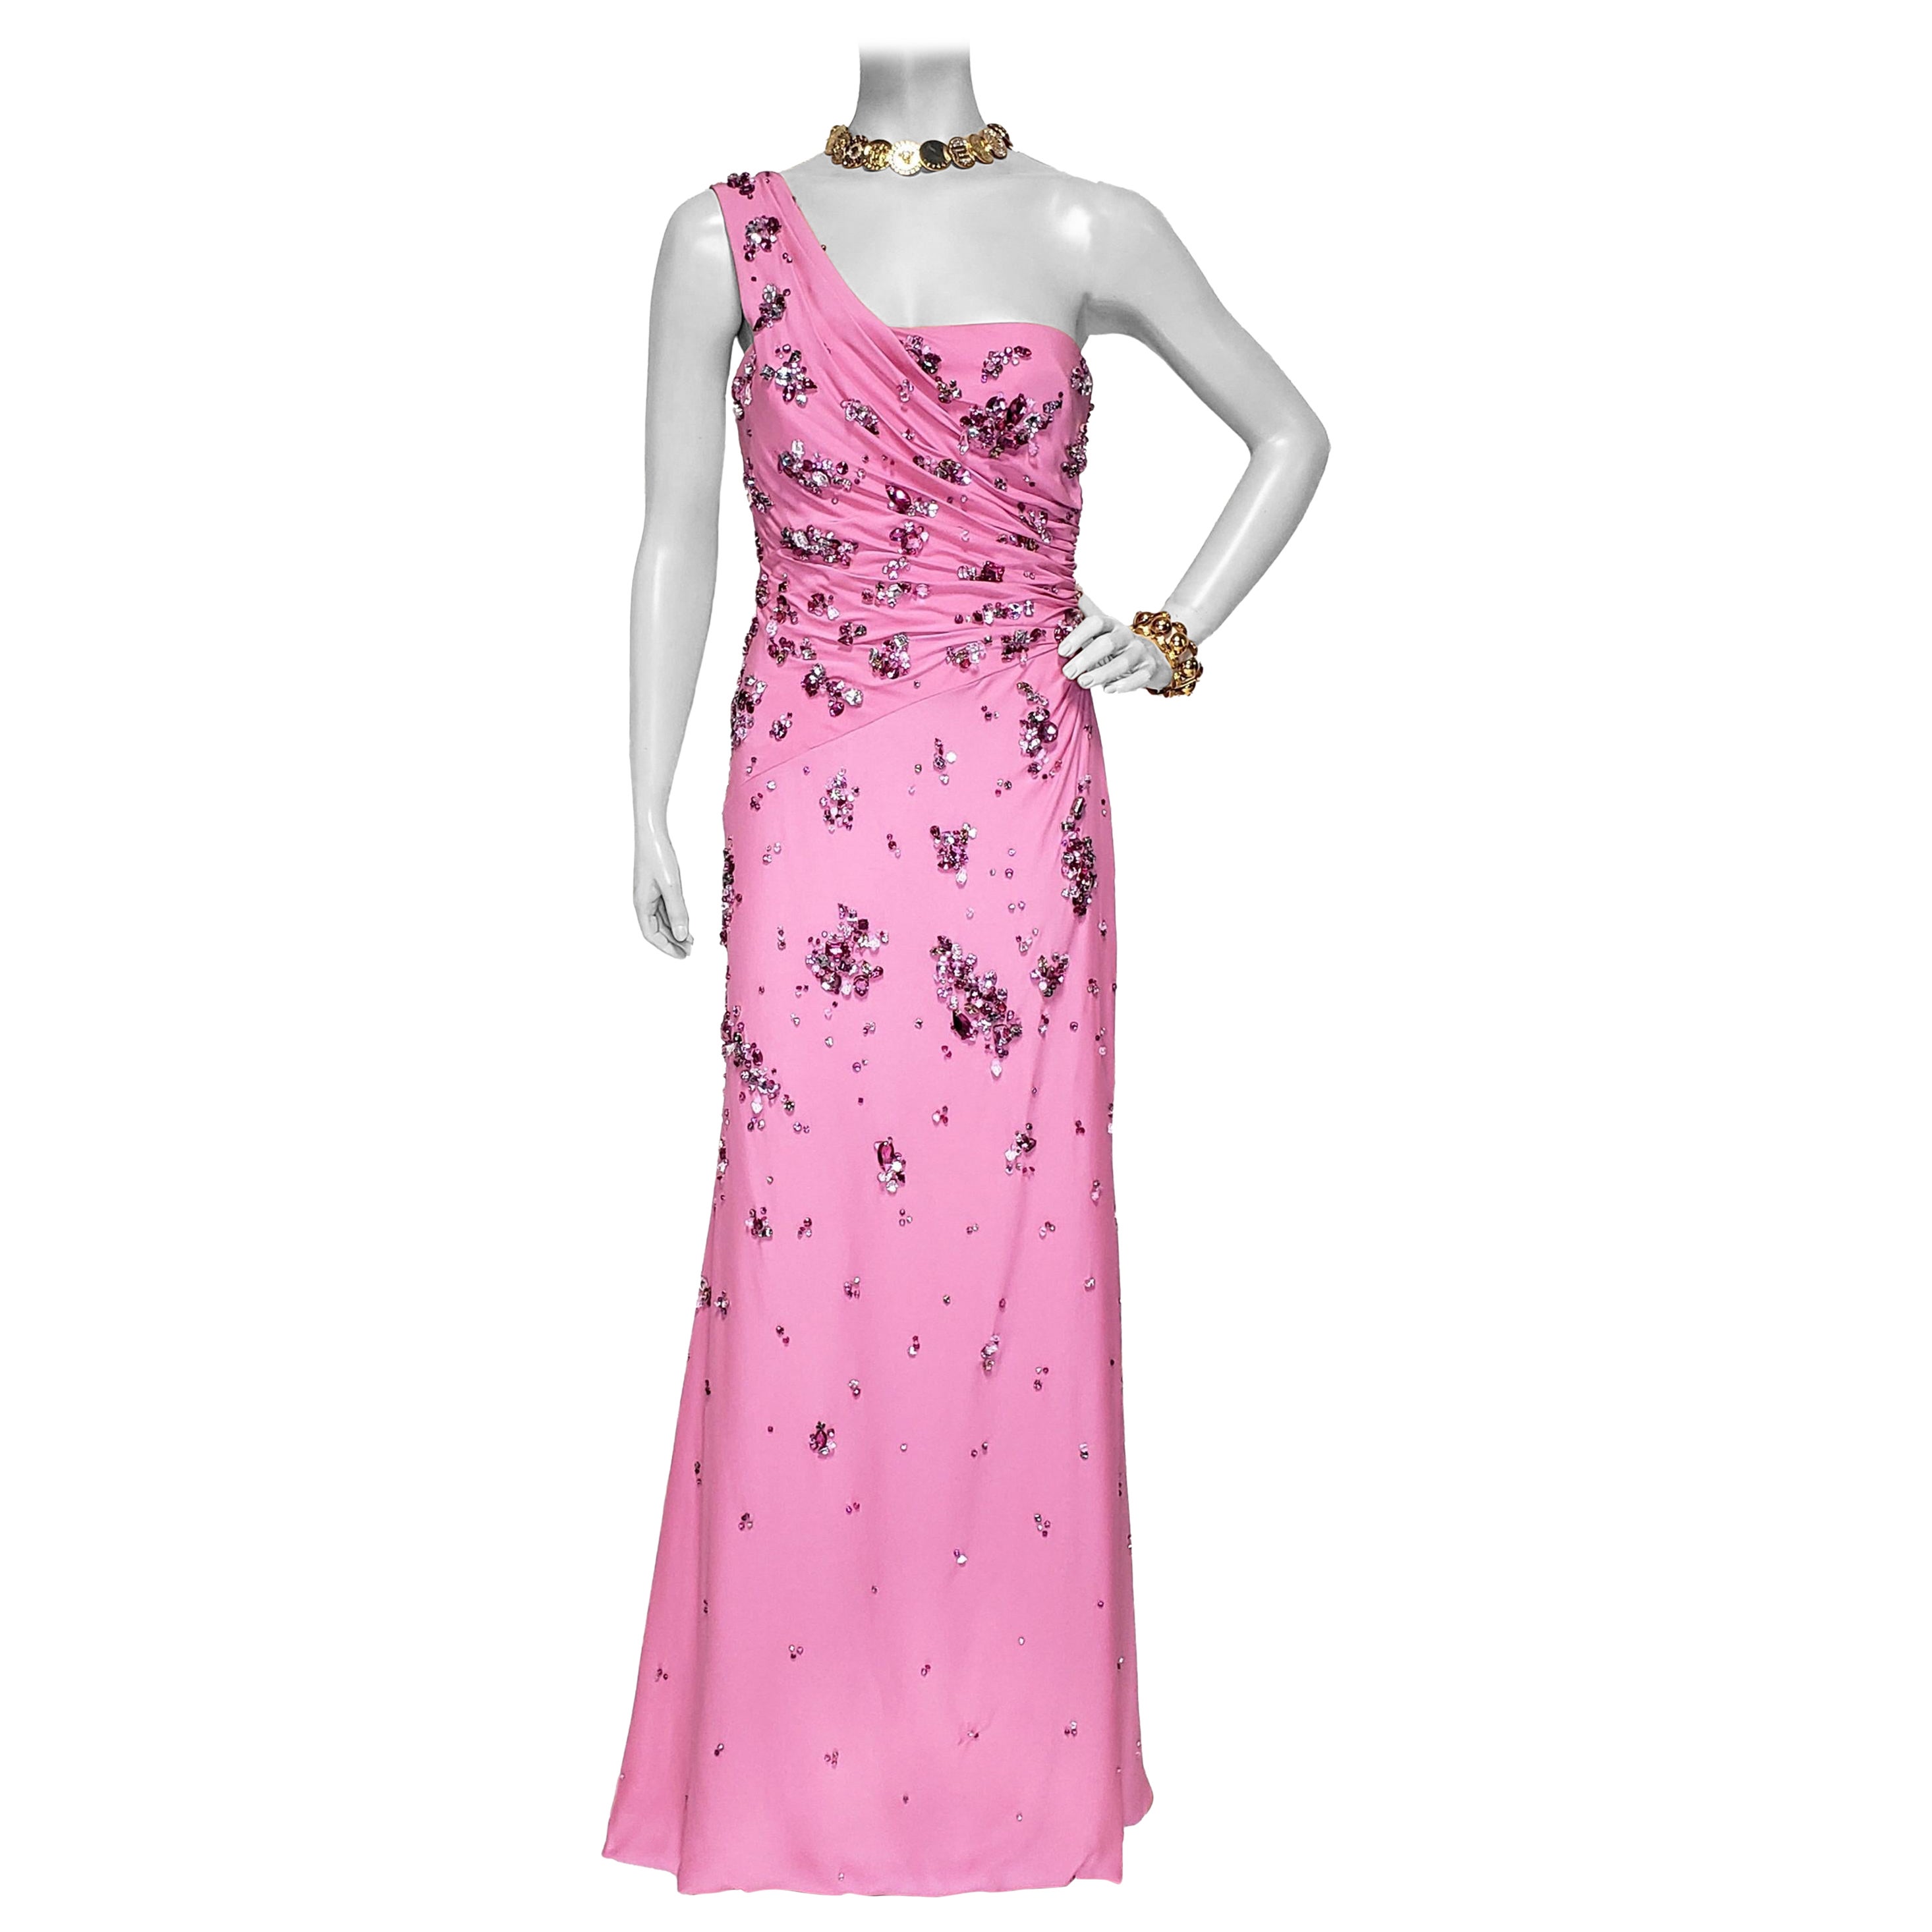 NEW PINK ONE SHOULDER GOWN with CRYSTALS FORMAL DRESS 42 - 6 For Sale